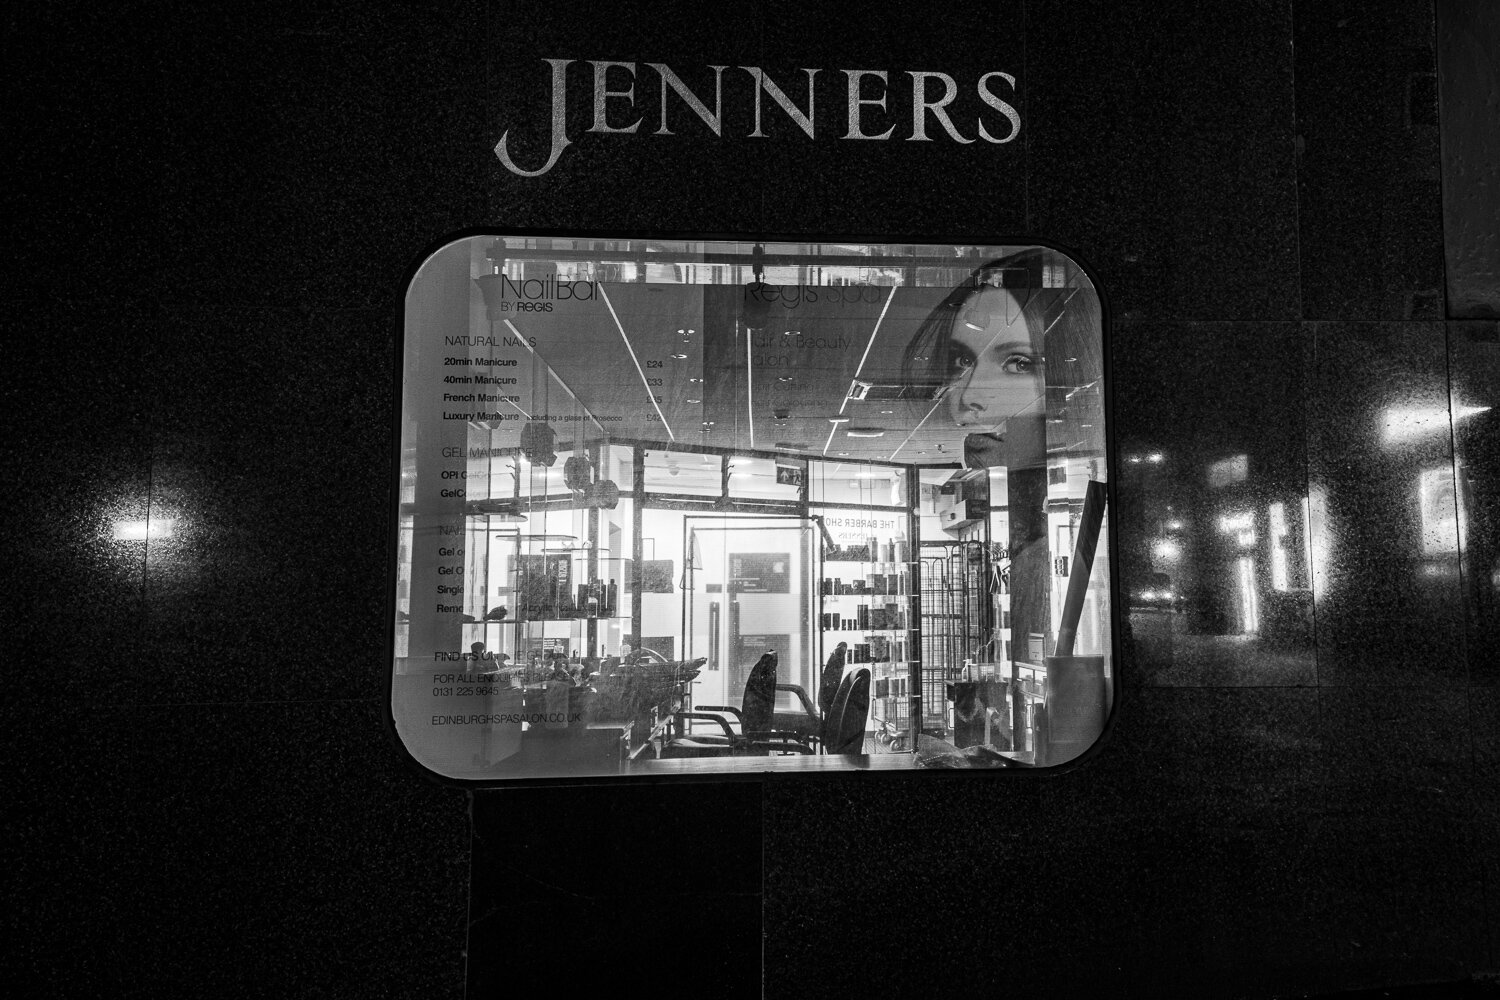 Closure of Jenners Department Store